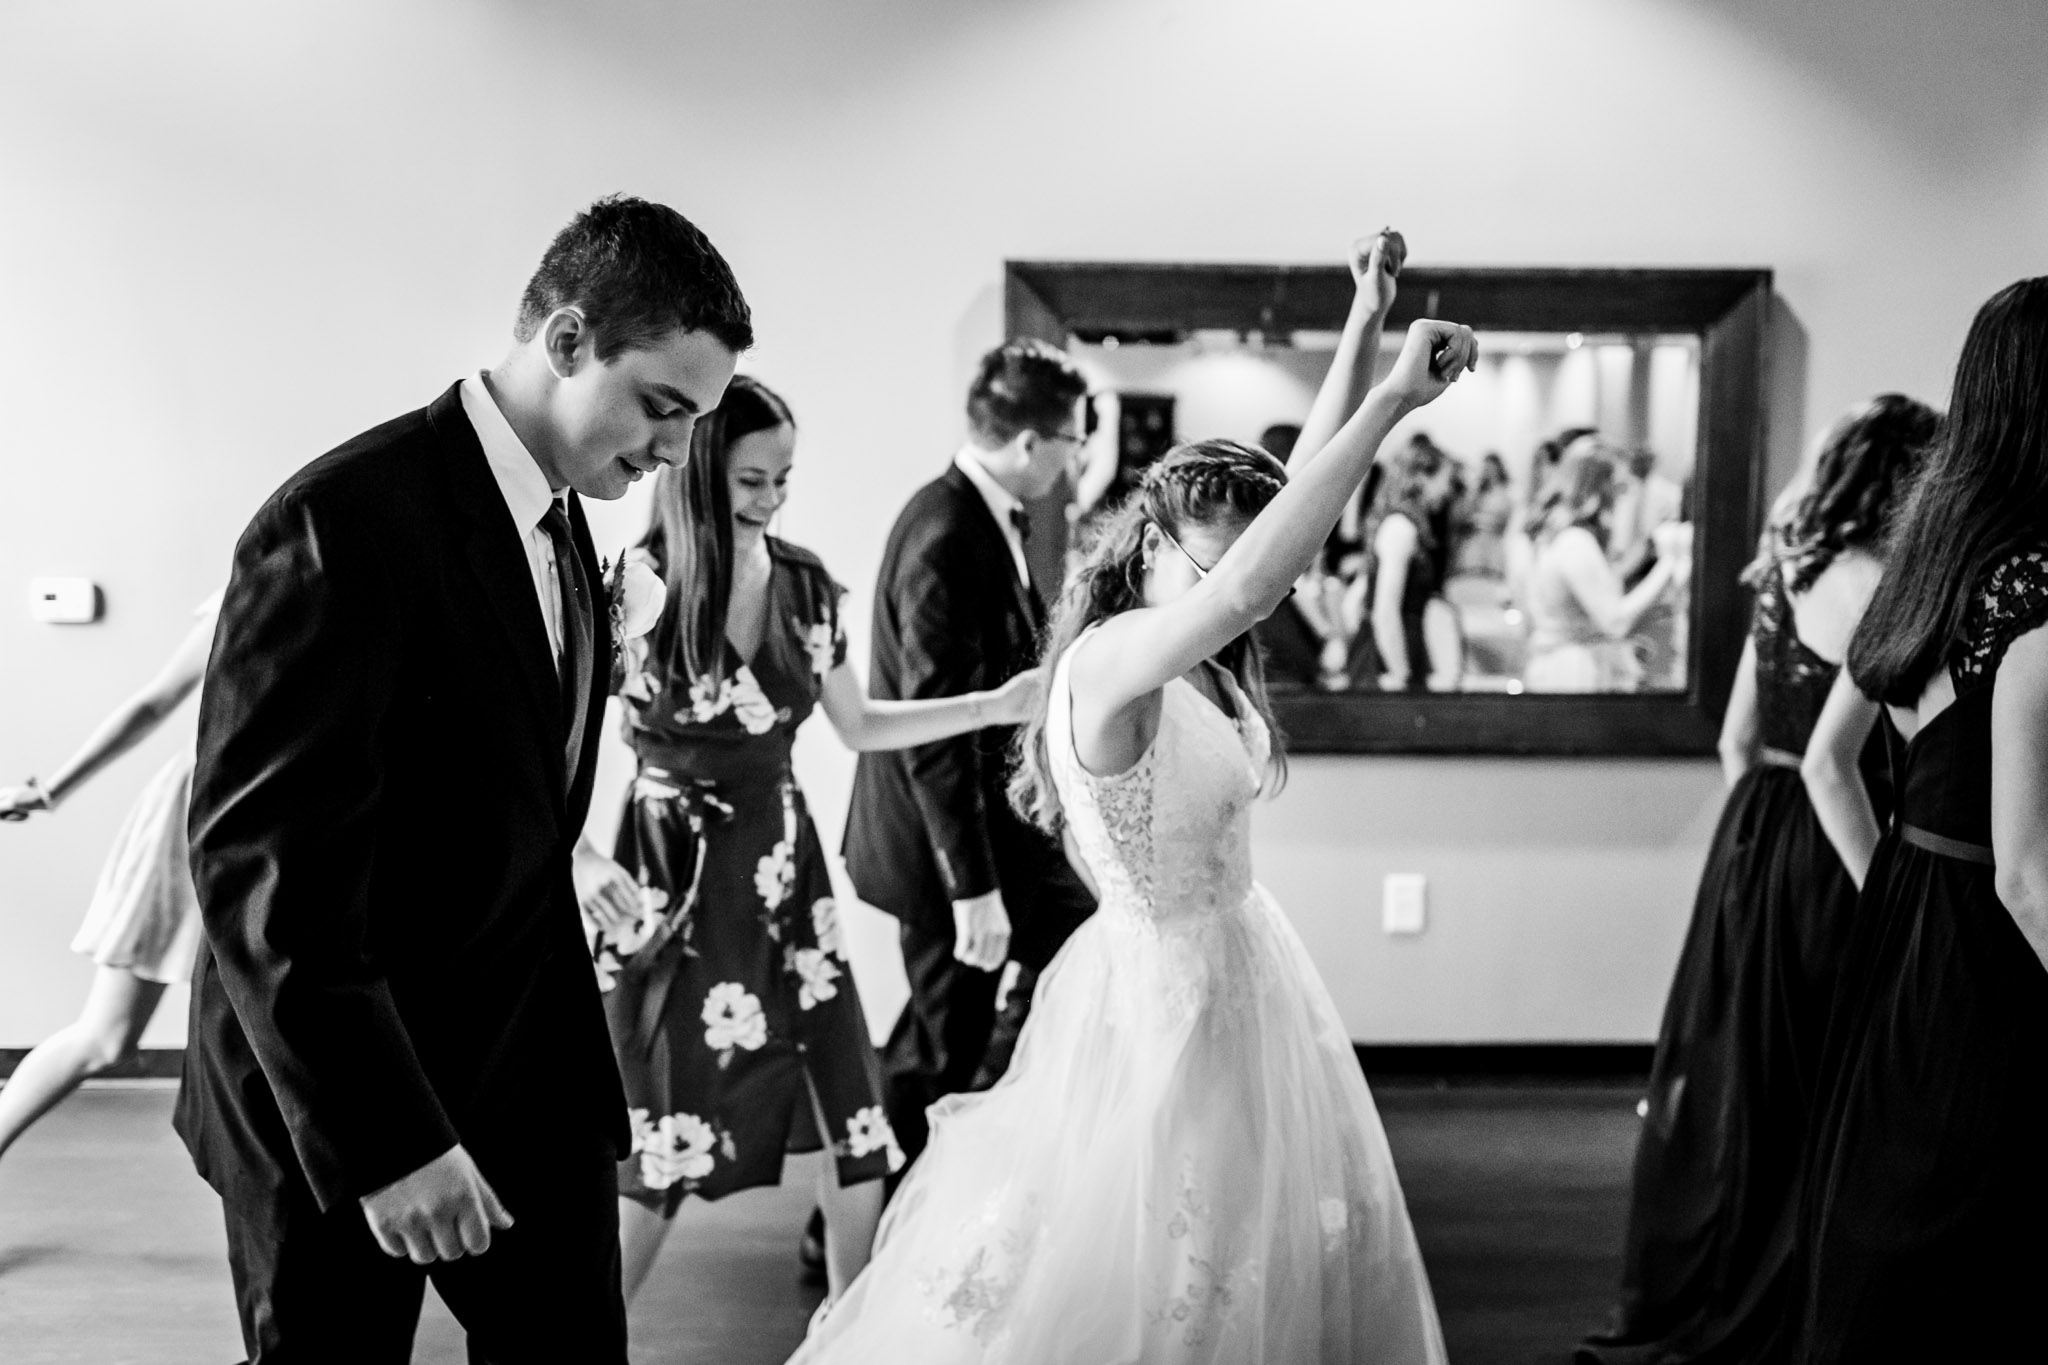 Wedding dancing at Royal Banquet Conference Center | Raleigh Wedding Photographer | By G. Lin Photography